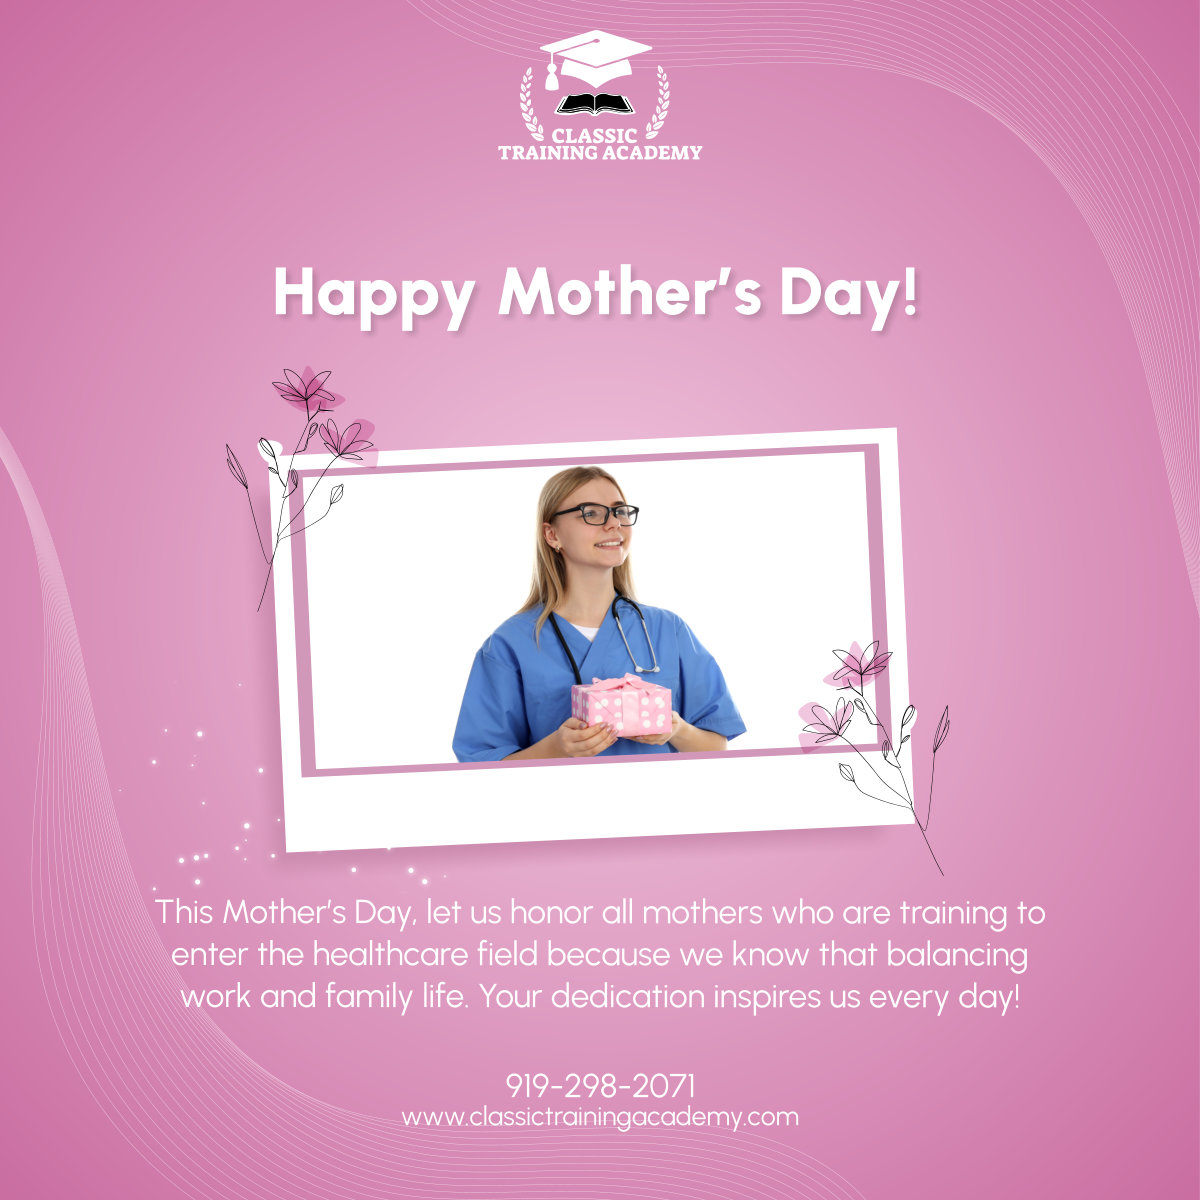 To all the mothers at Classic Training Academy, we salute your hard work and determination. Happy Mother’s Day! 

#RaleighNC #MothersDay #ClassicTrainingAcademy